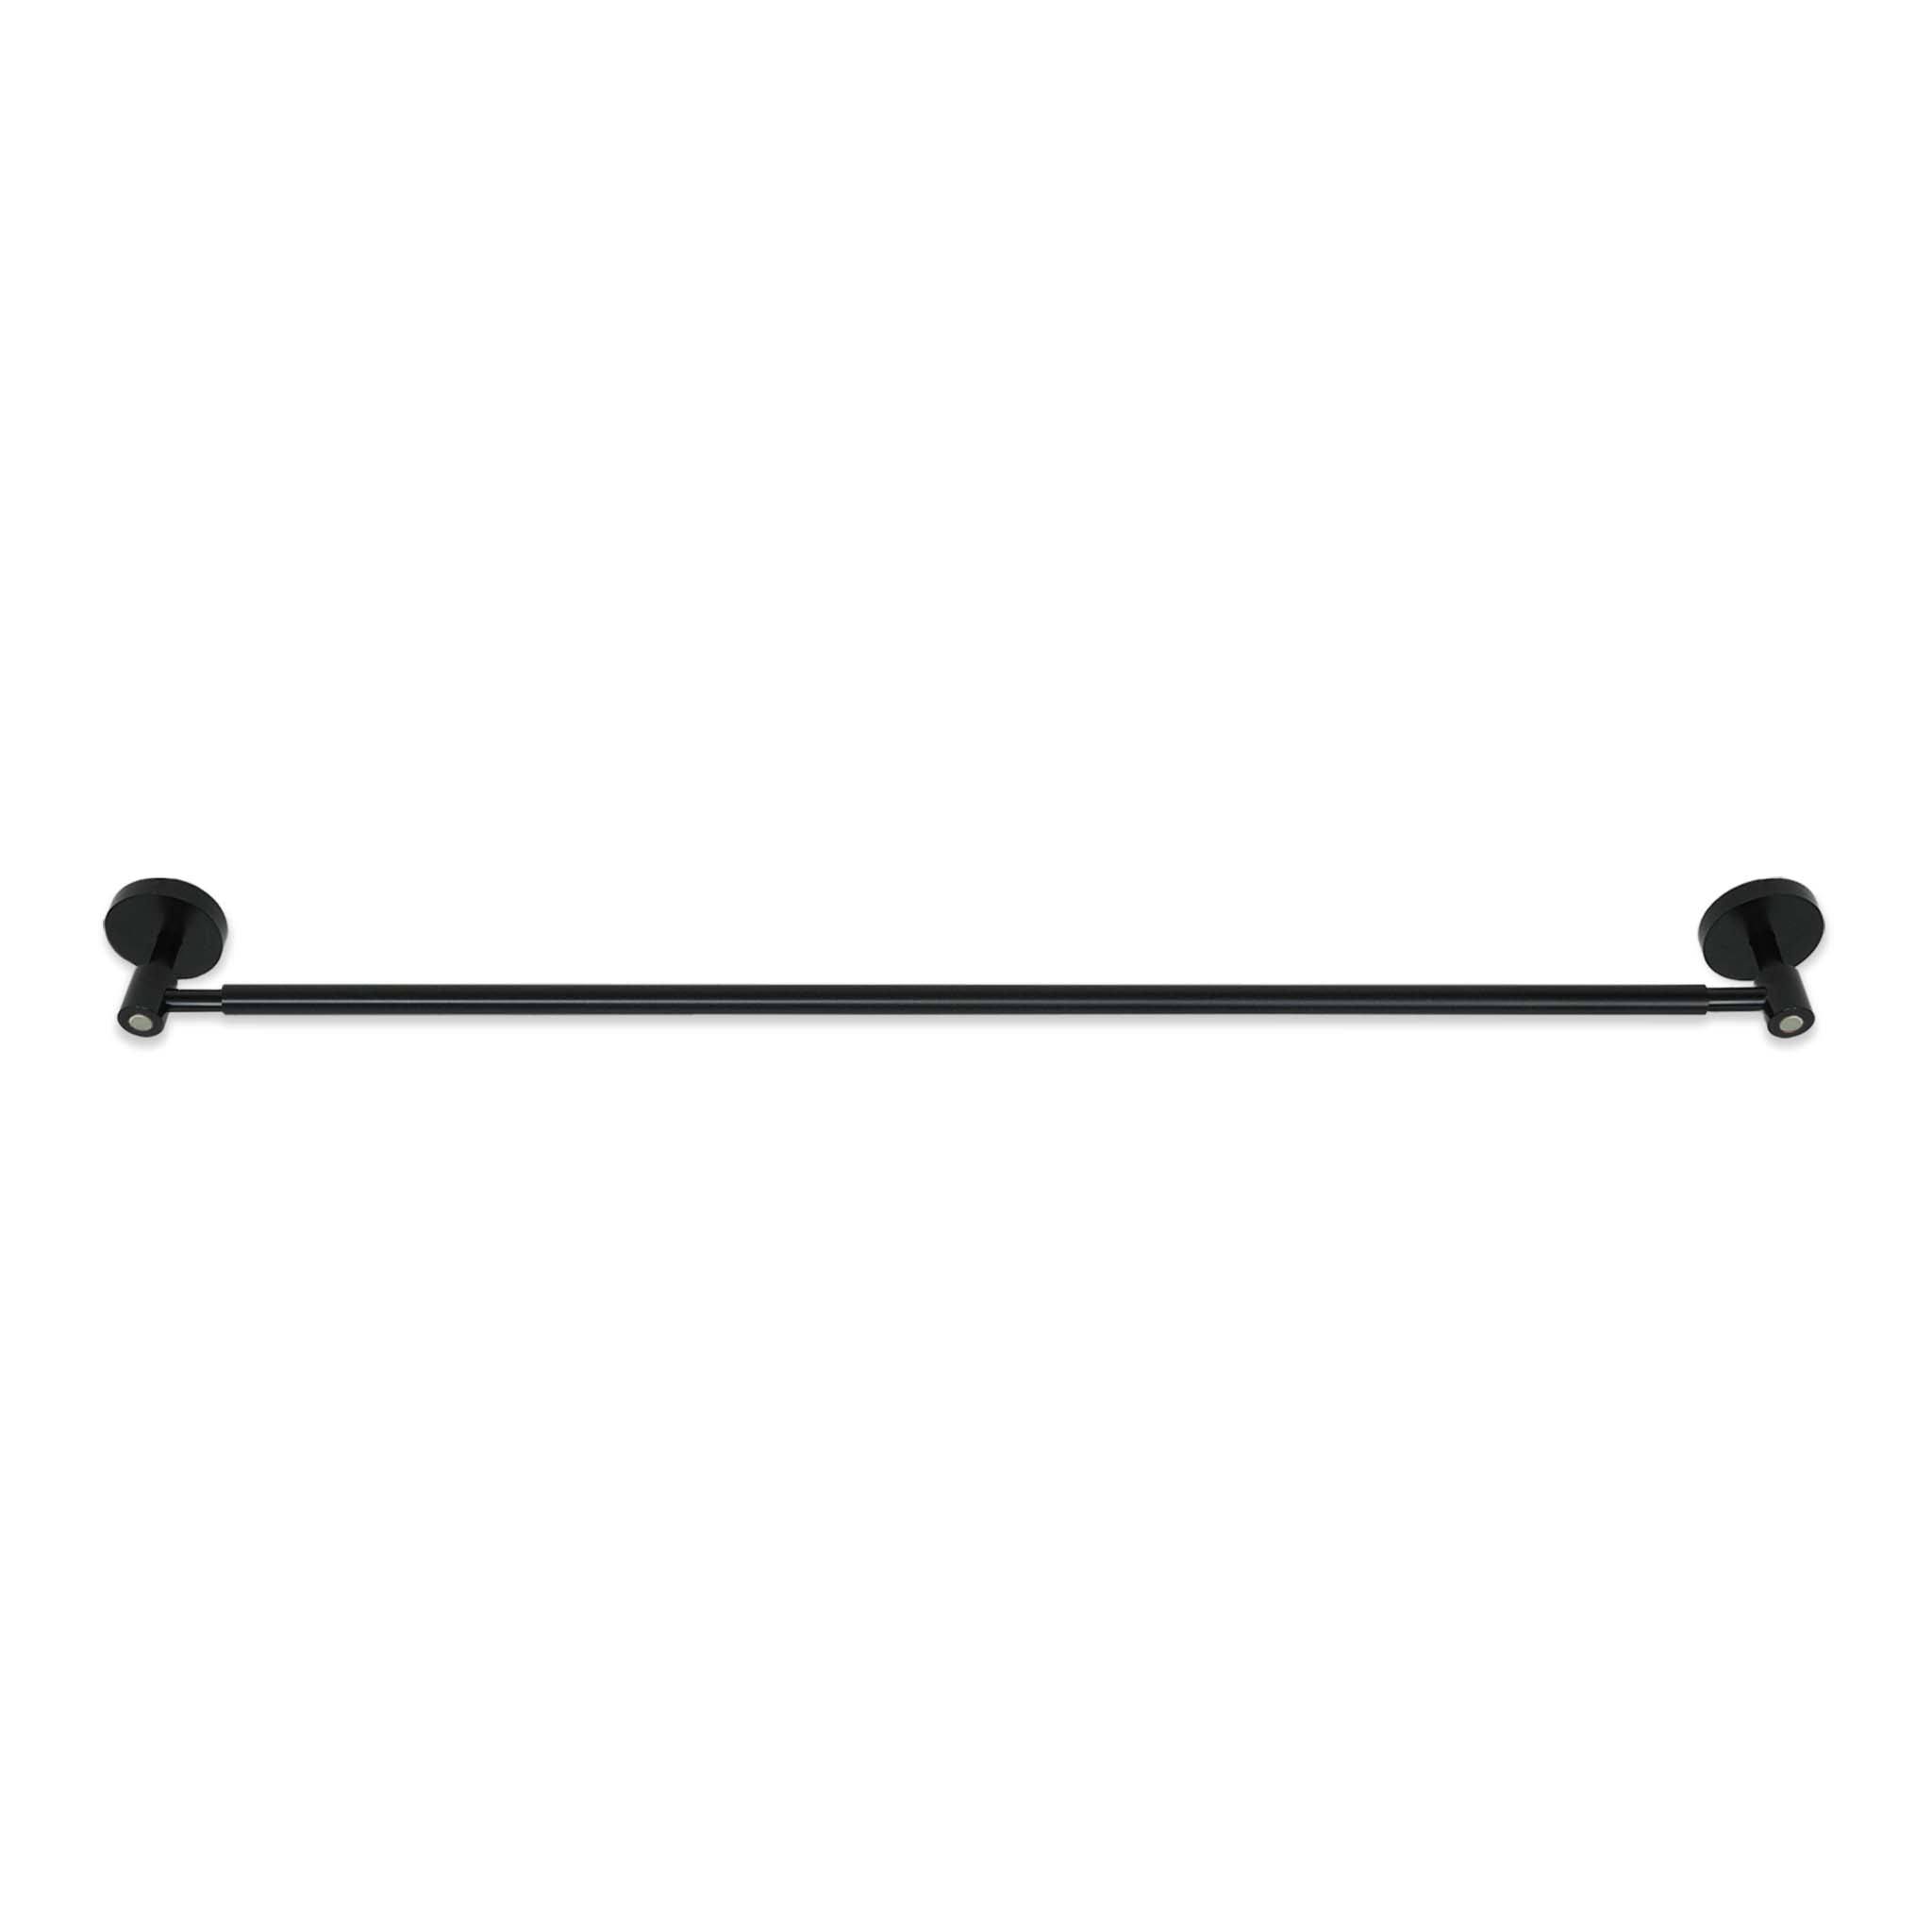 Black and spa color Head towel bar 24" Dutton Brown hardware